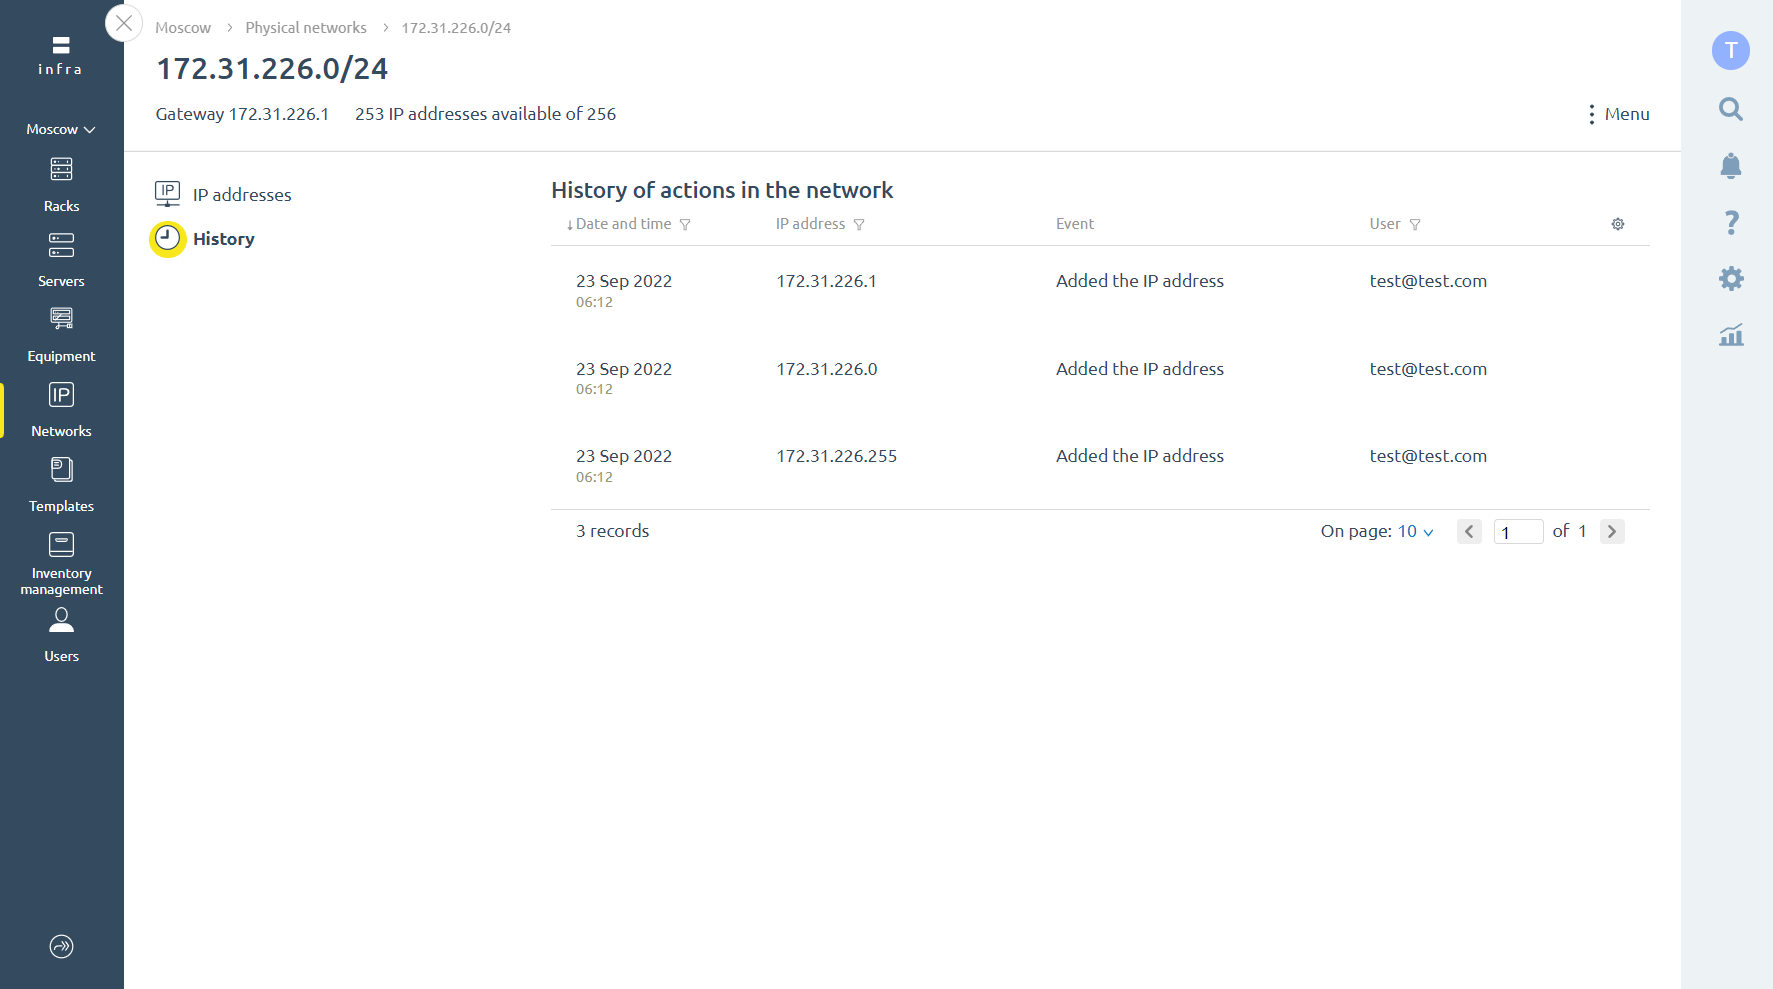 DCImanager shows the history of network activities